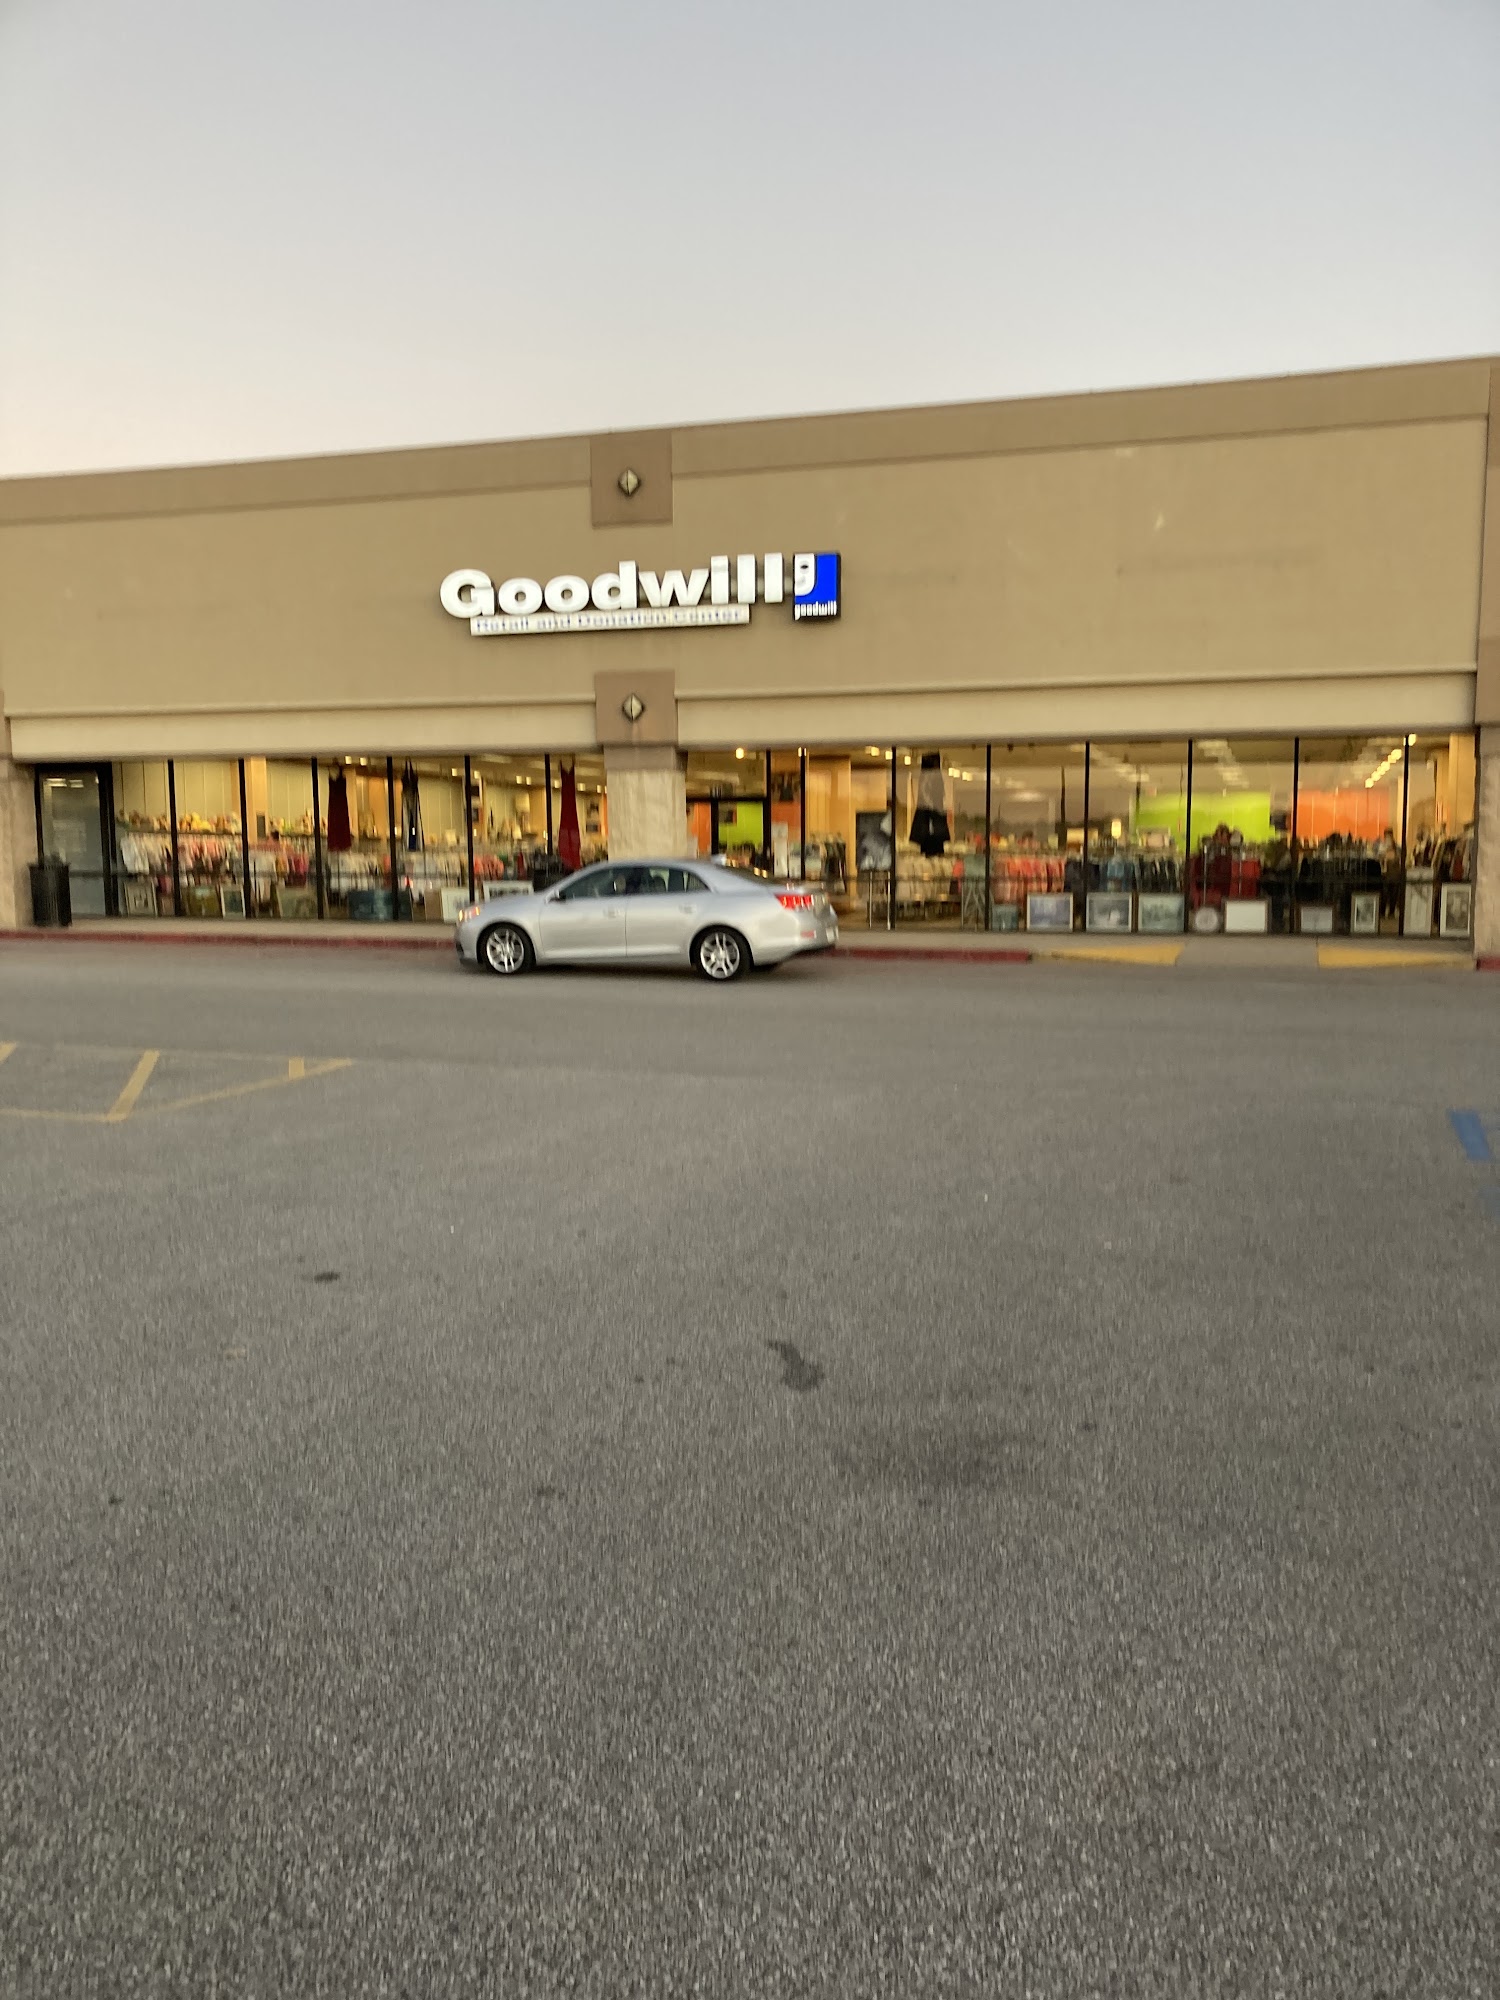 Goodwill Retail And Donation Center